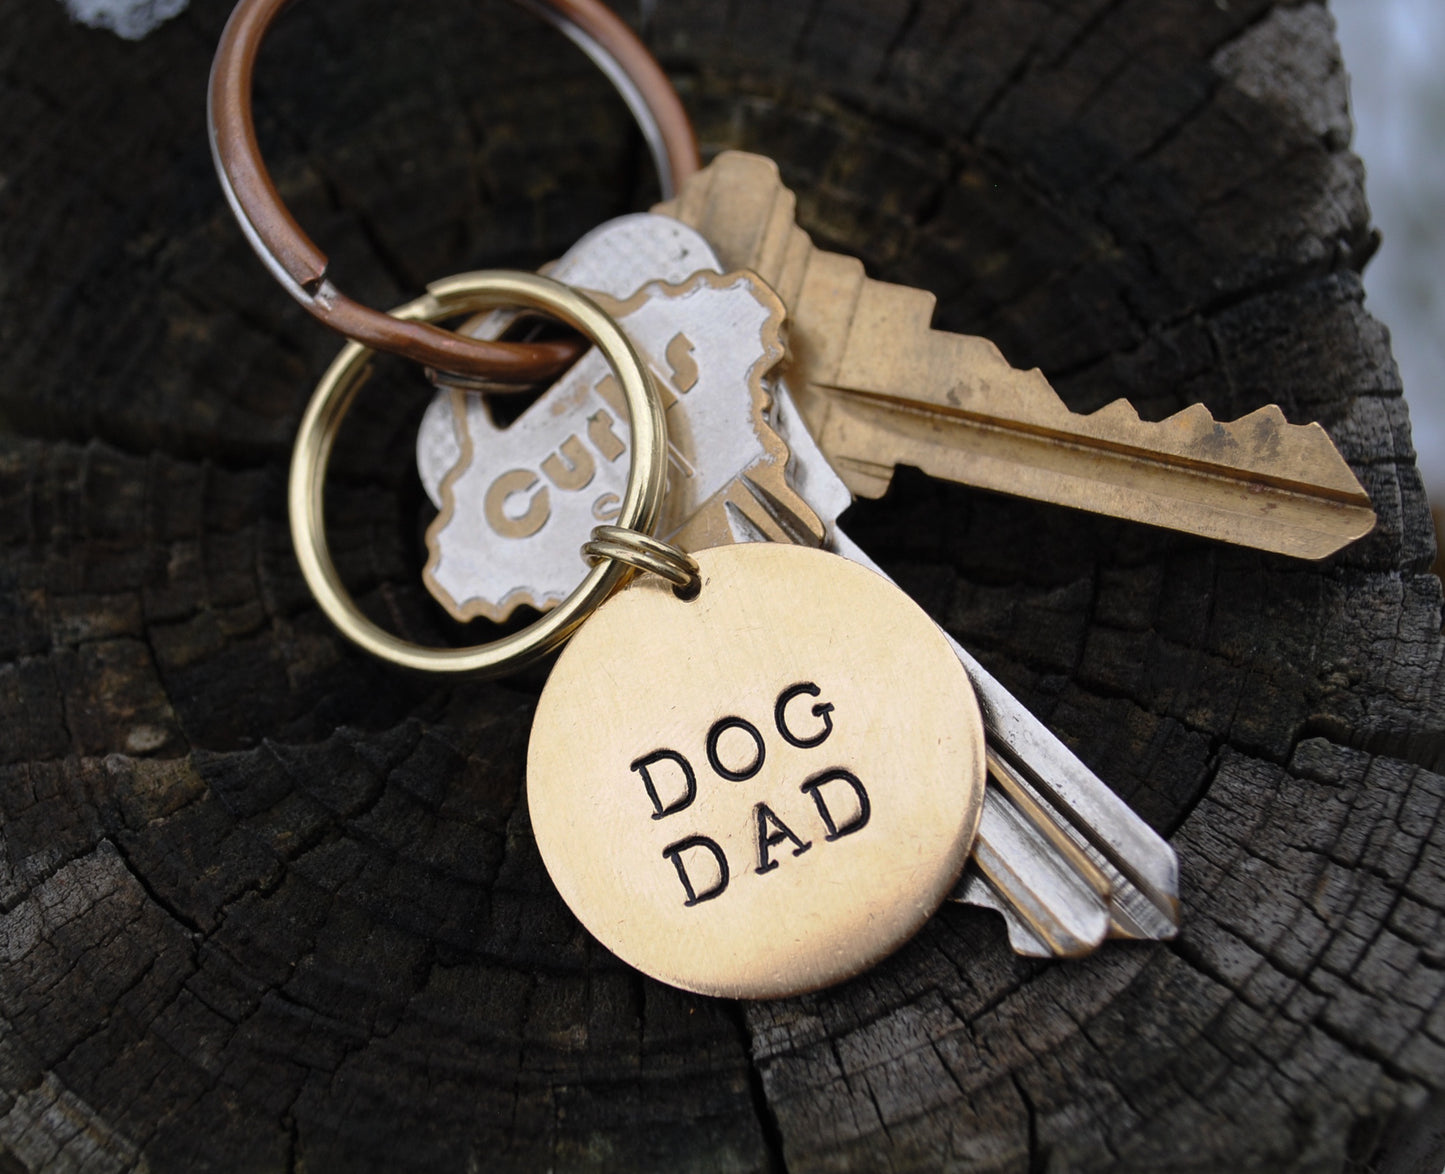 Dog Dad Keychain - Dog Dad Gift - Gift for Him - Pet Parents Gift - Fur Dad - Dog Dad Keytag - Gift for Couples - Cat Dad Gift - Unique Gift - Christmas Gift for Him - Birthday Gift for Him